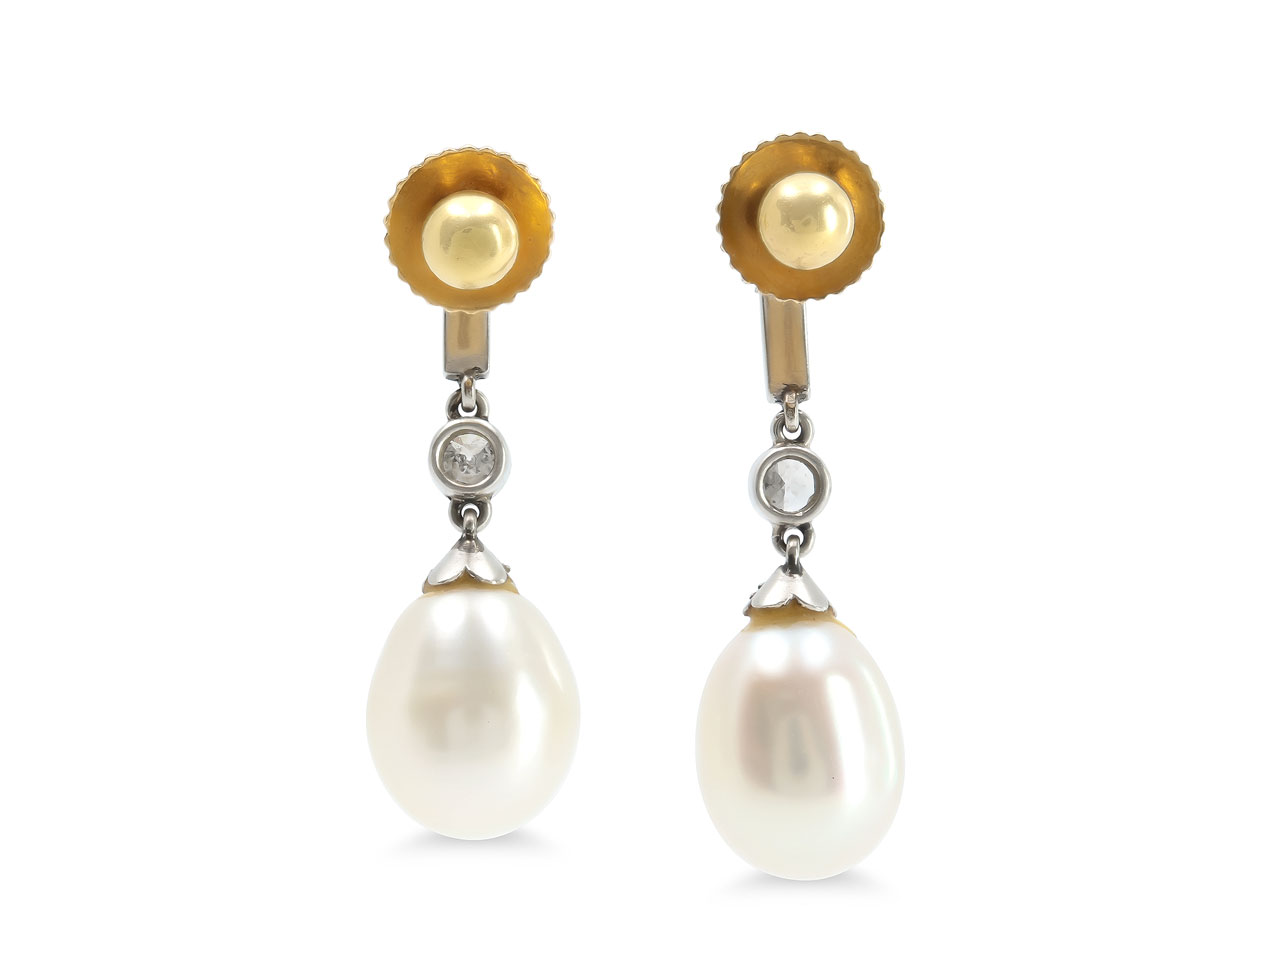 Antique Victorian Diamond and Pearl Earrings in 18K Gold